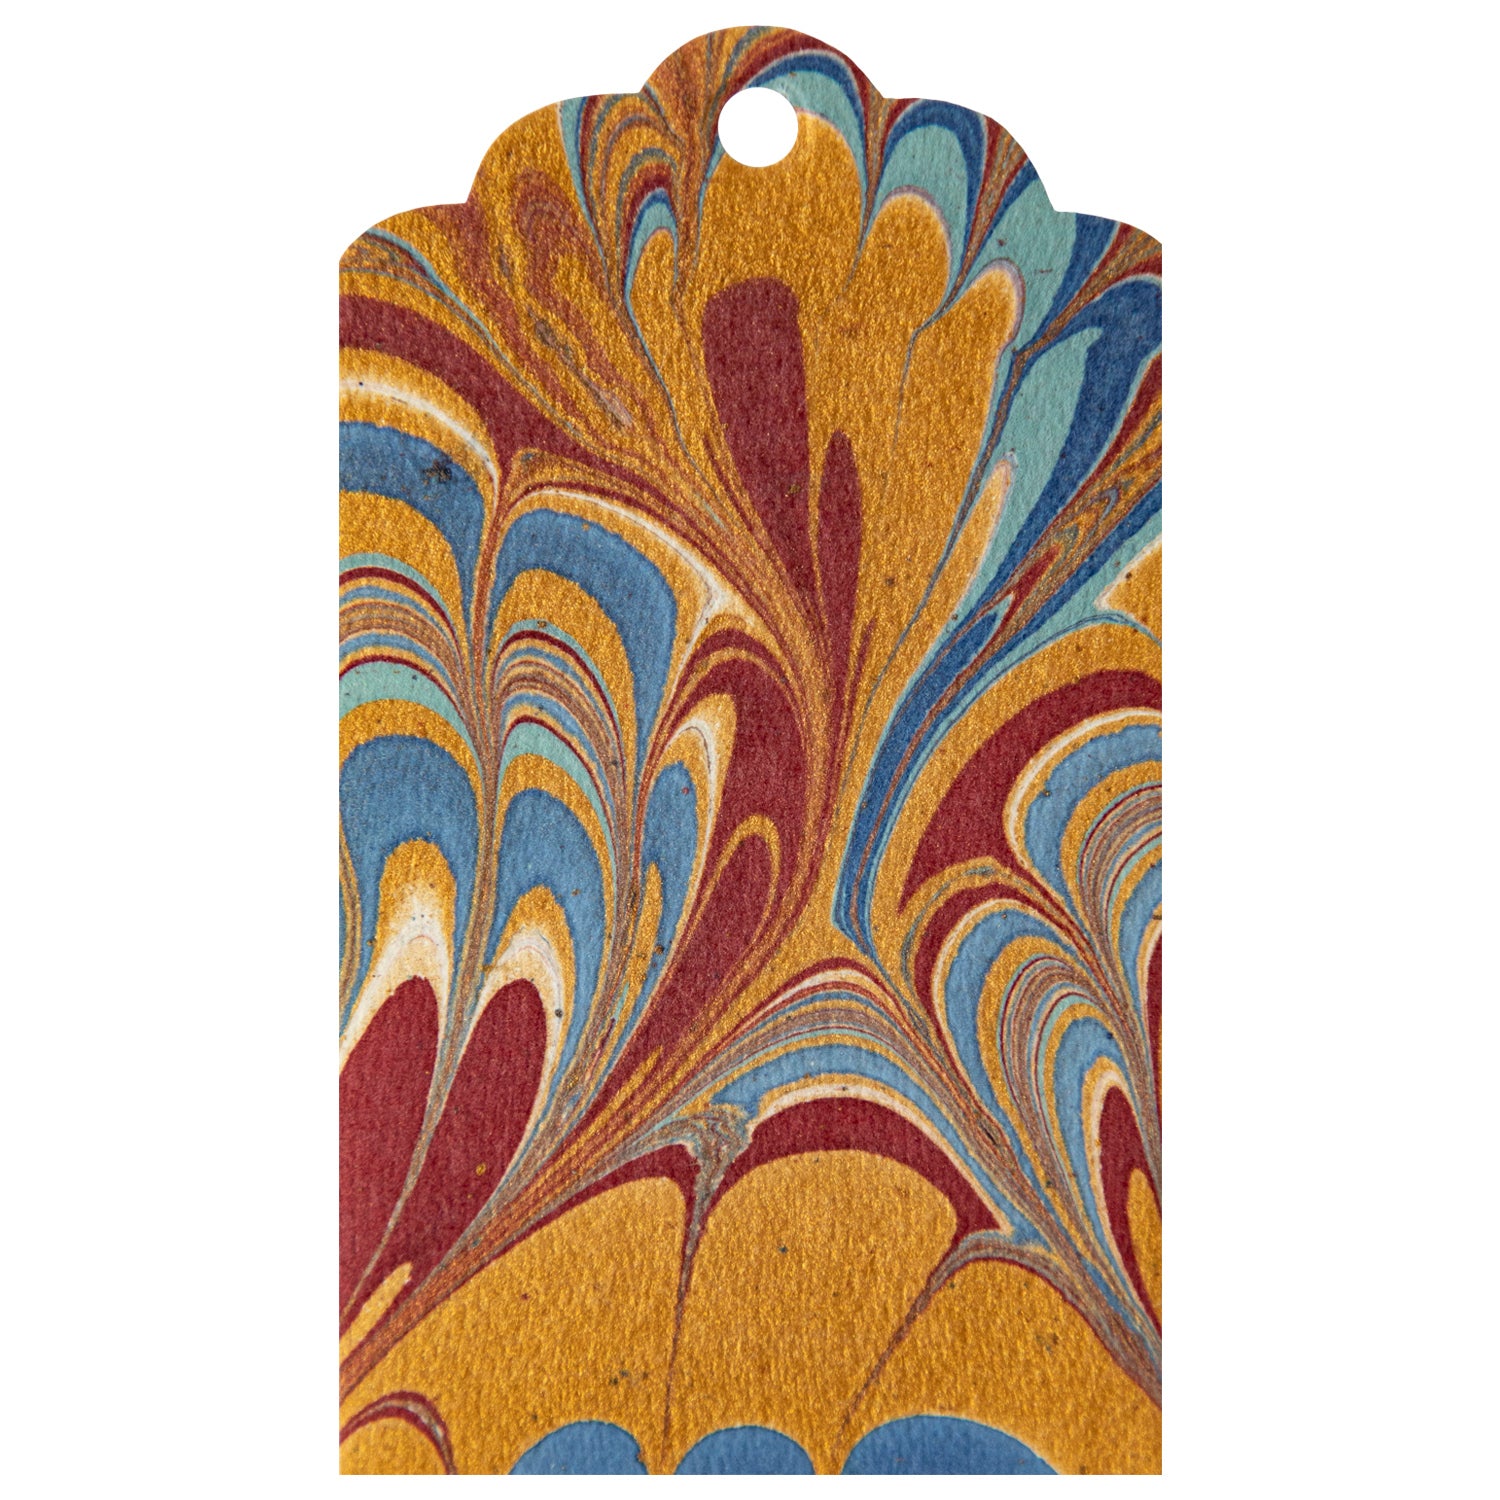 A Peacock Marbled Gift Tag with a colorful swirl design made from handmade papers by Hester &amp; Cook.